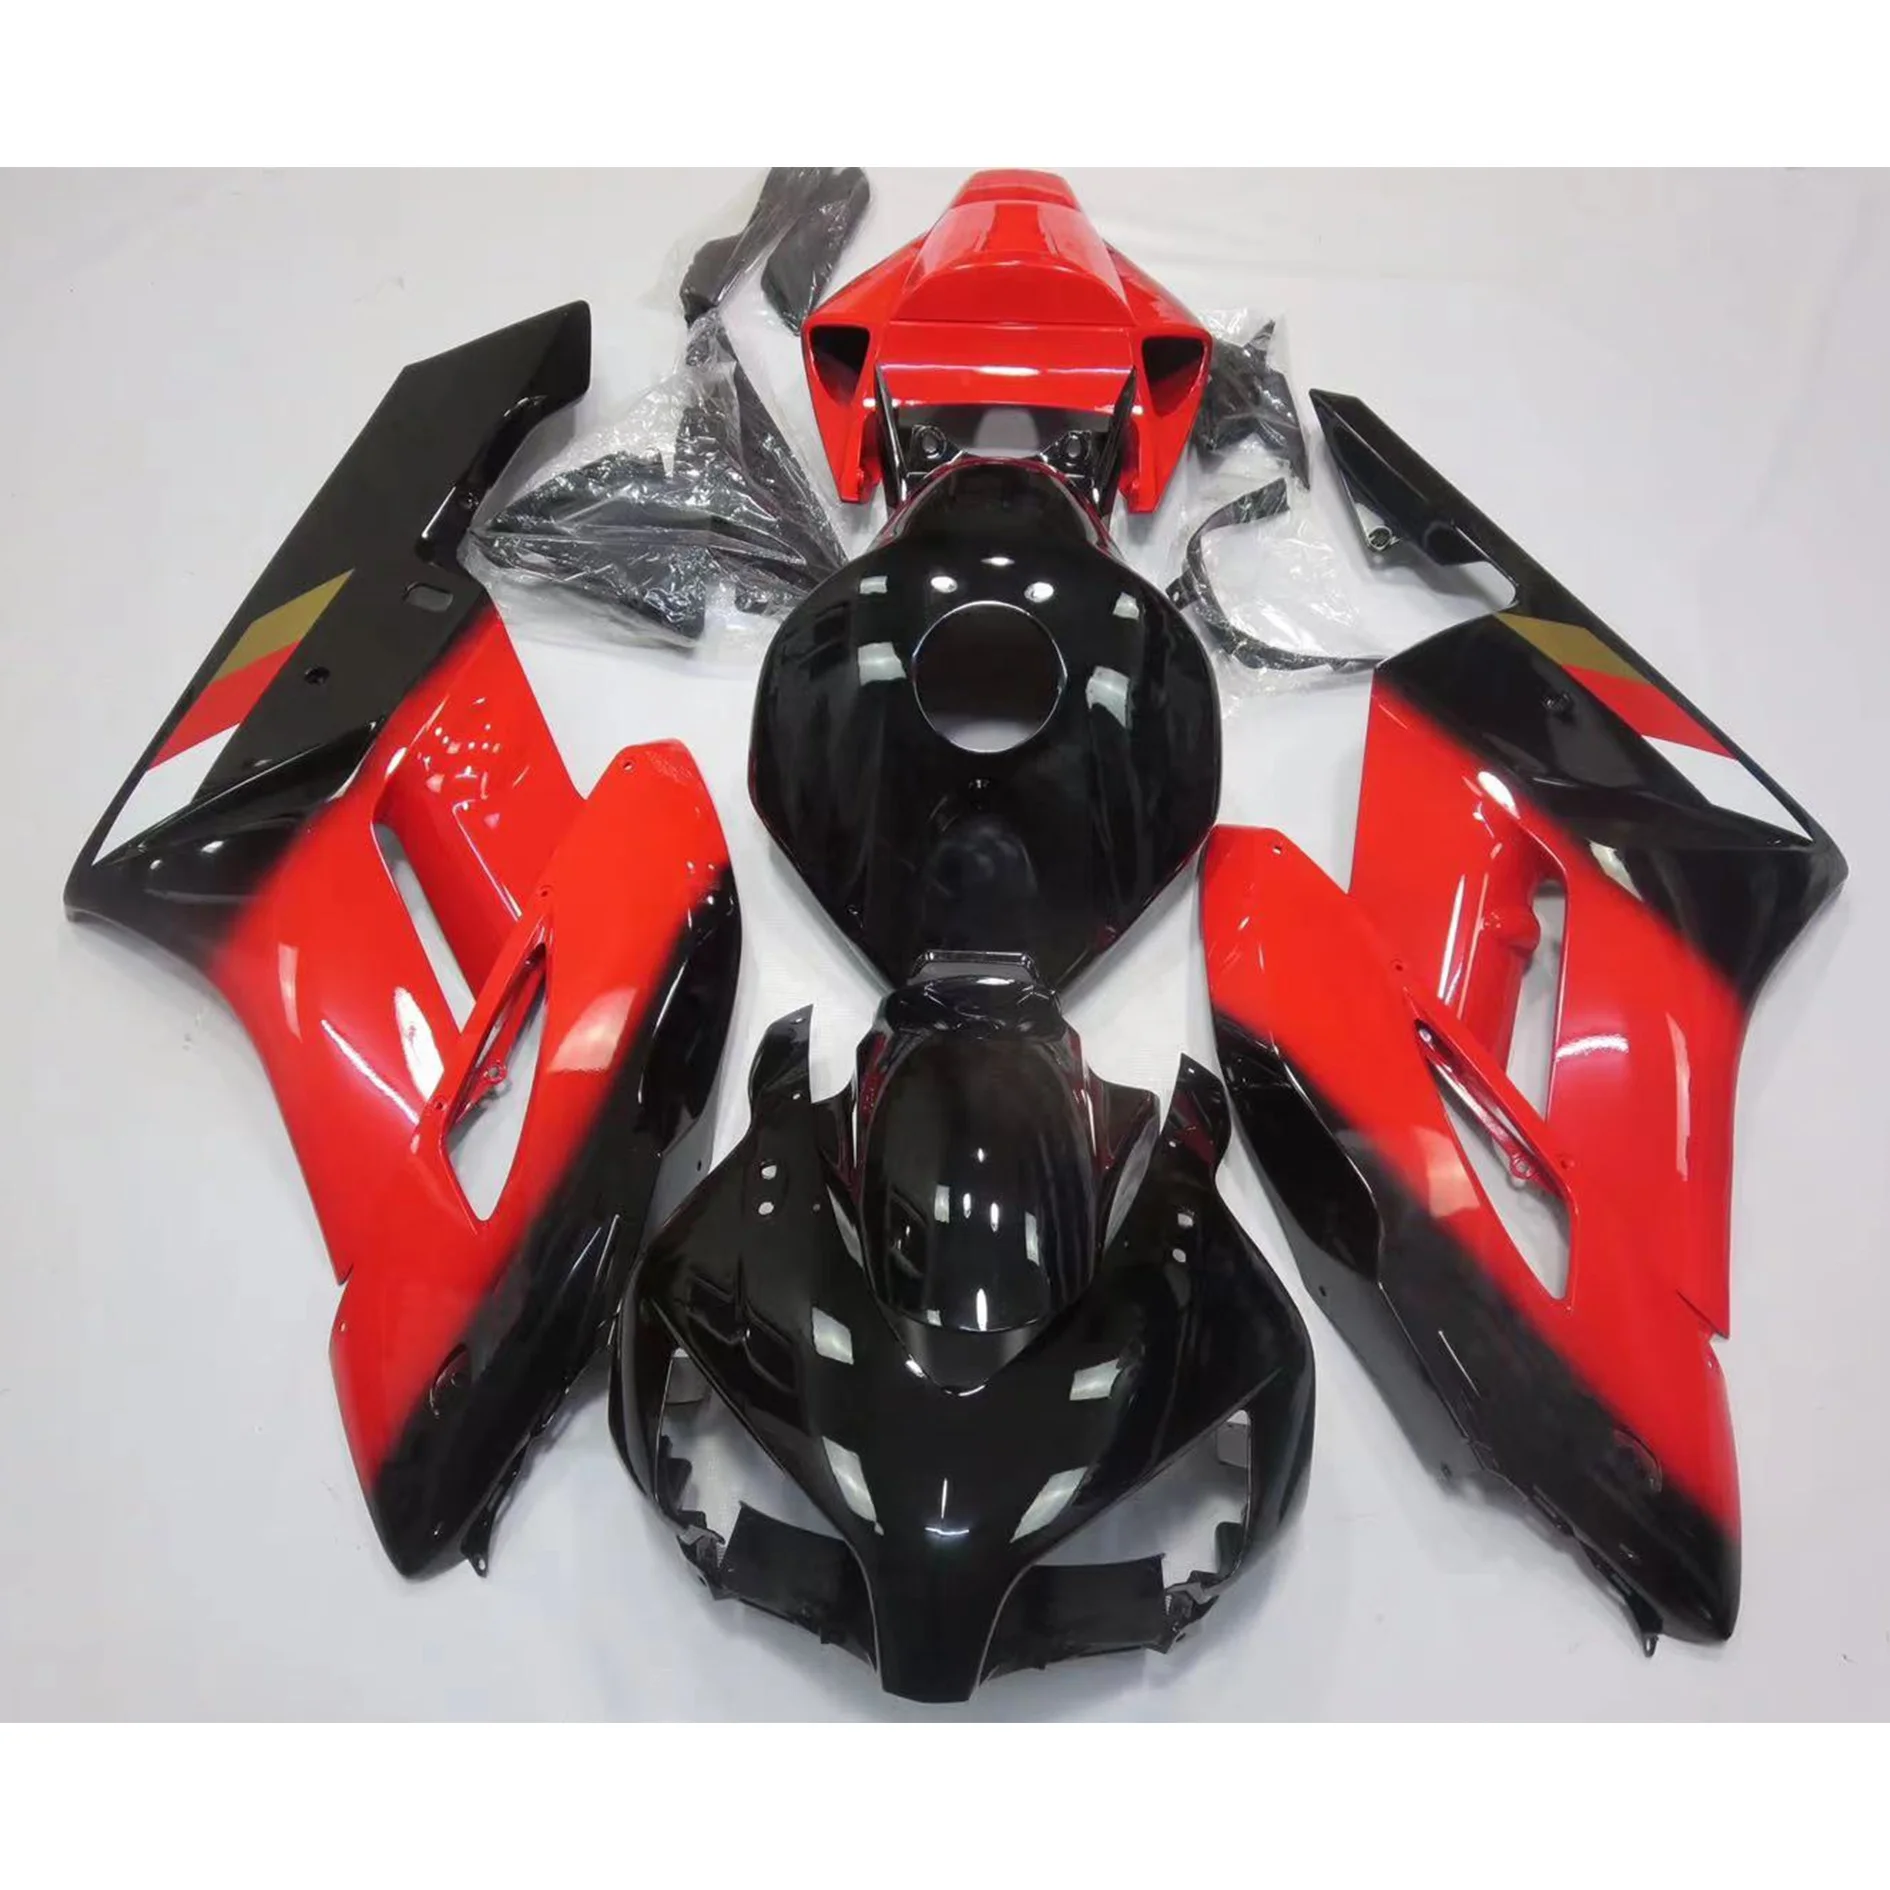 

2022 WHSC Red And Black OEM Motorcycle Accessories For HONDA CBR1000RR 2004-2005 04 05 Motorcycle Body System Fairing Kits, Pictures shown